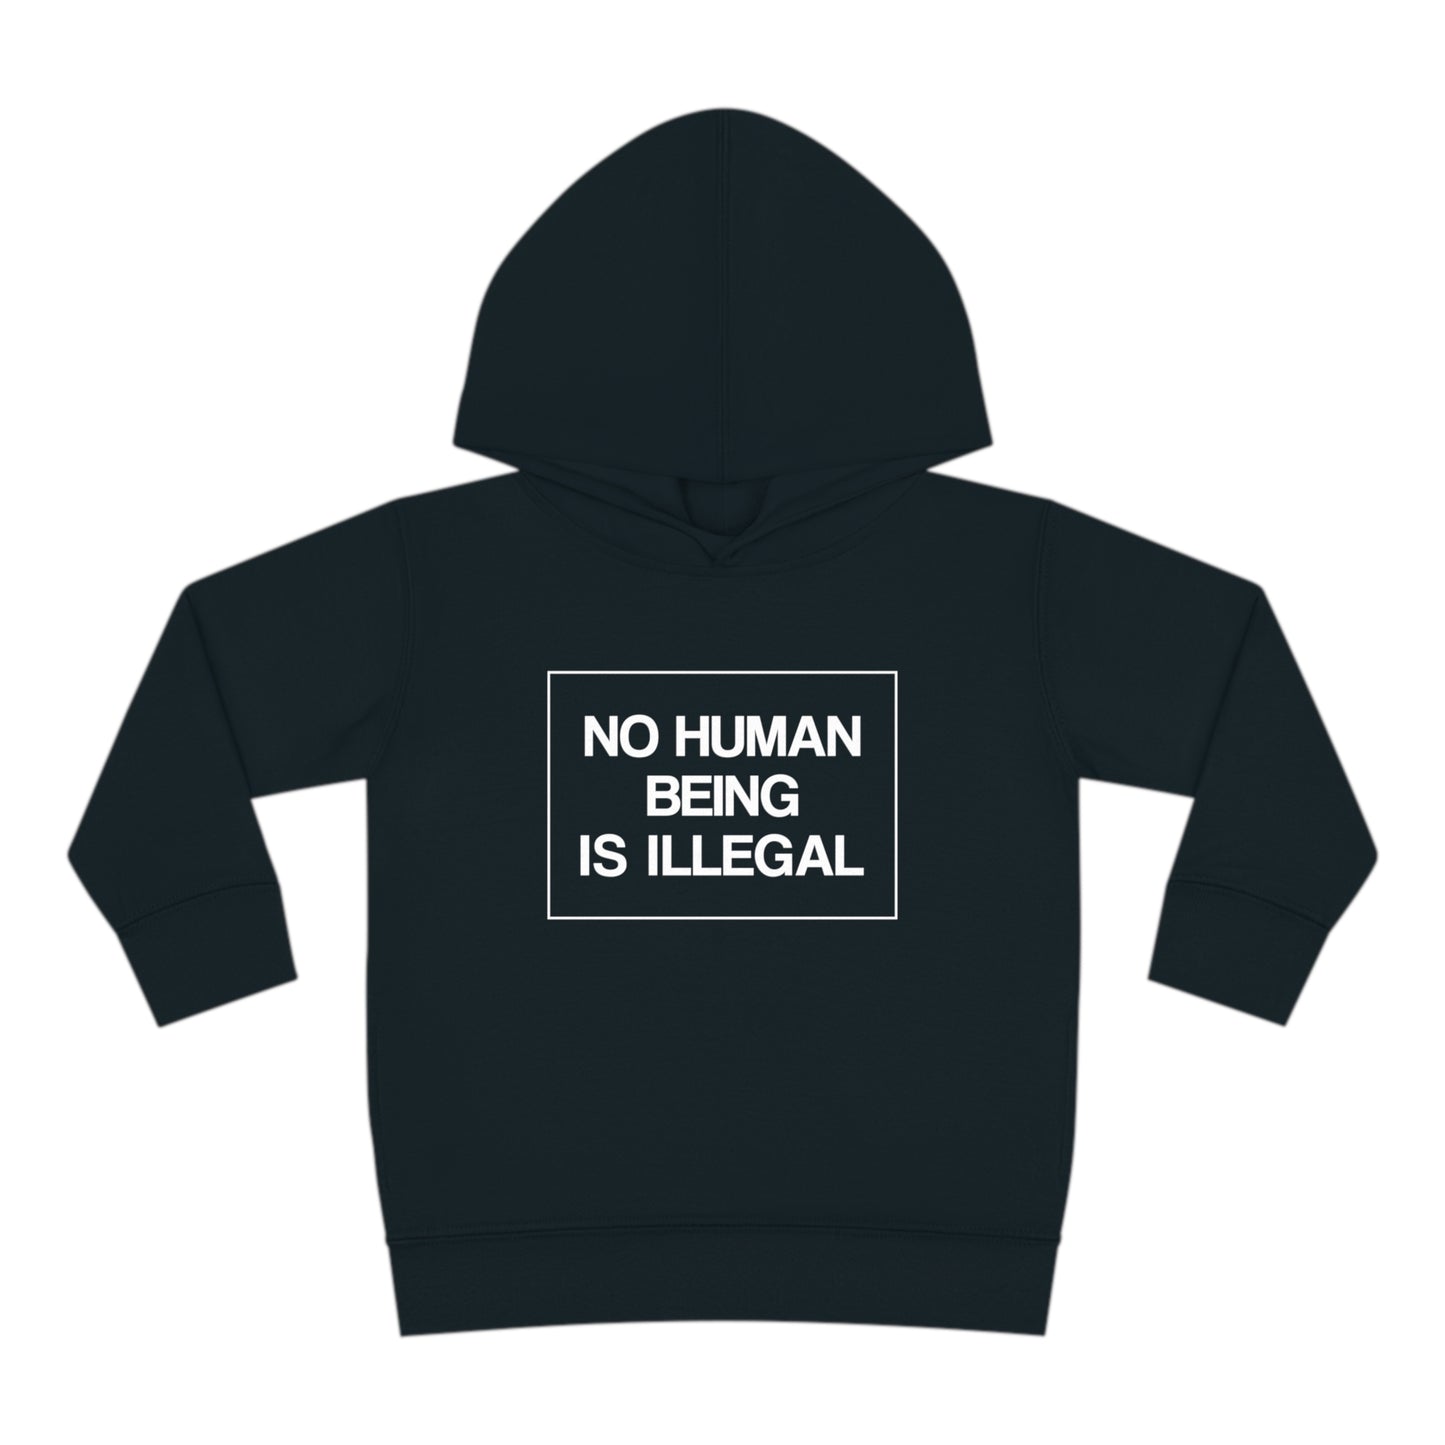 “No Human Being is Illegal” Toddler Hoodie